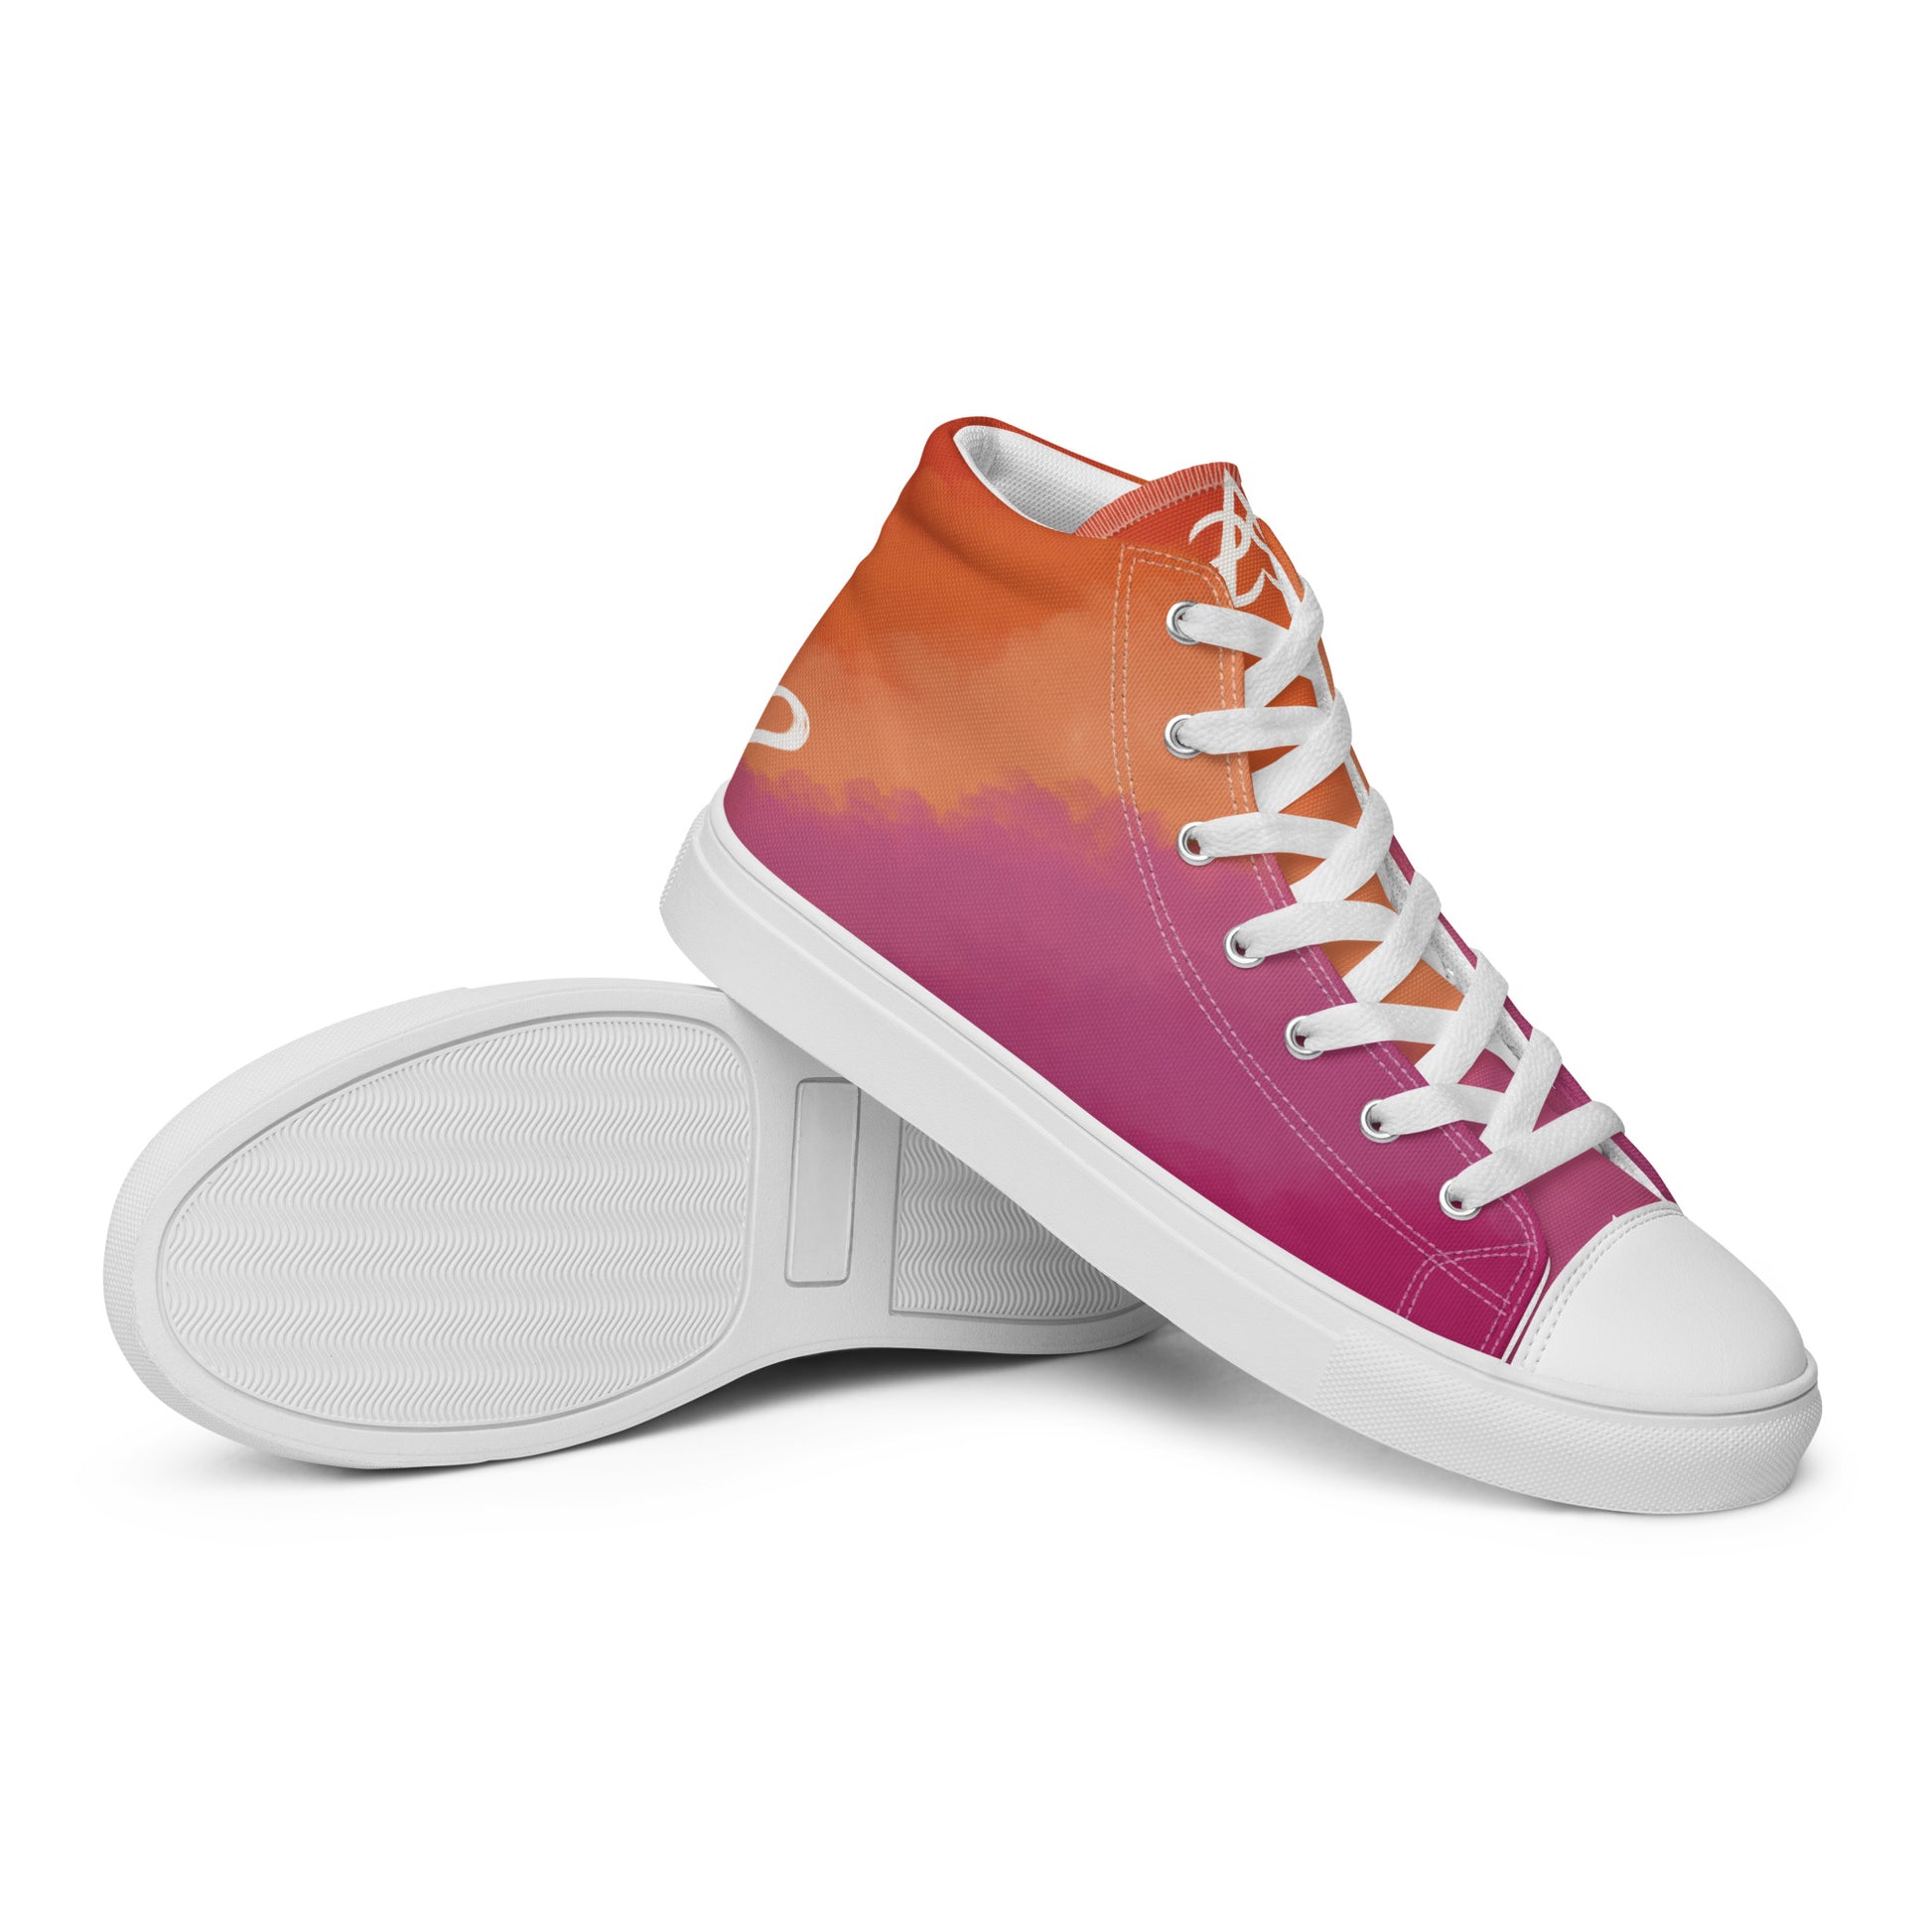 A pair of high top shoes with cloud layers in the lesbian flag colors, a white heart on the heel, and the Aras Sivad Studio logo on the tongue.